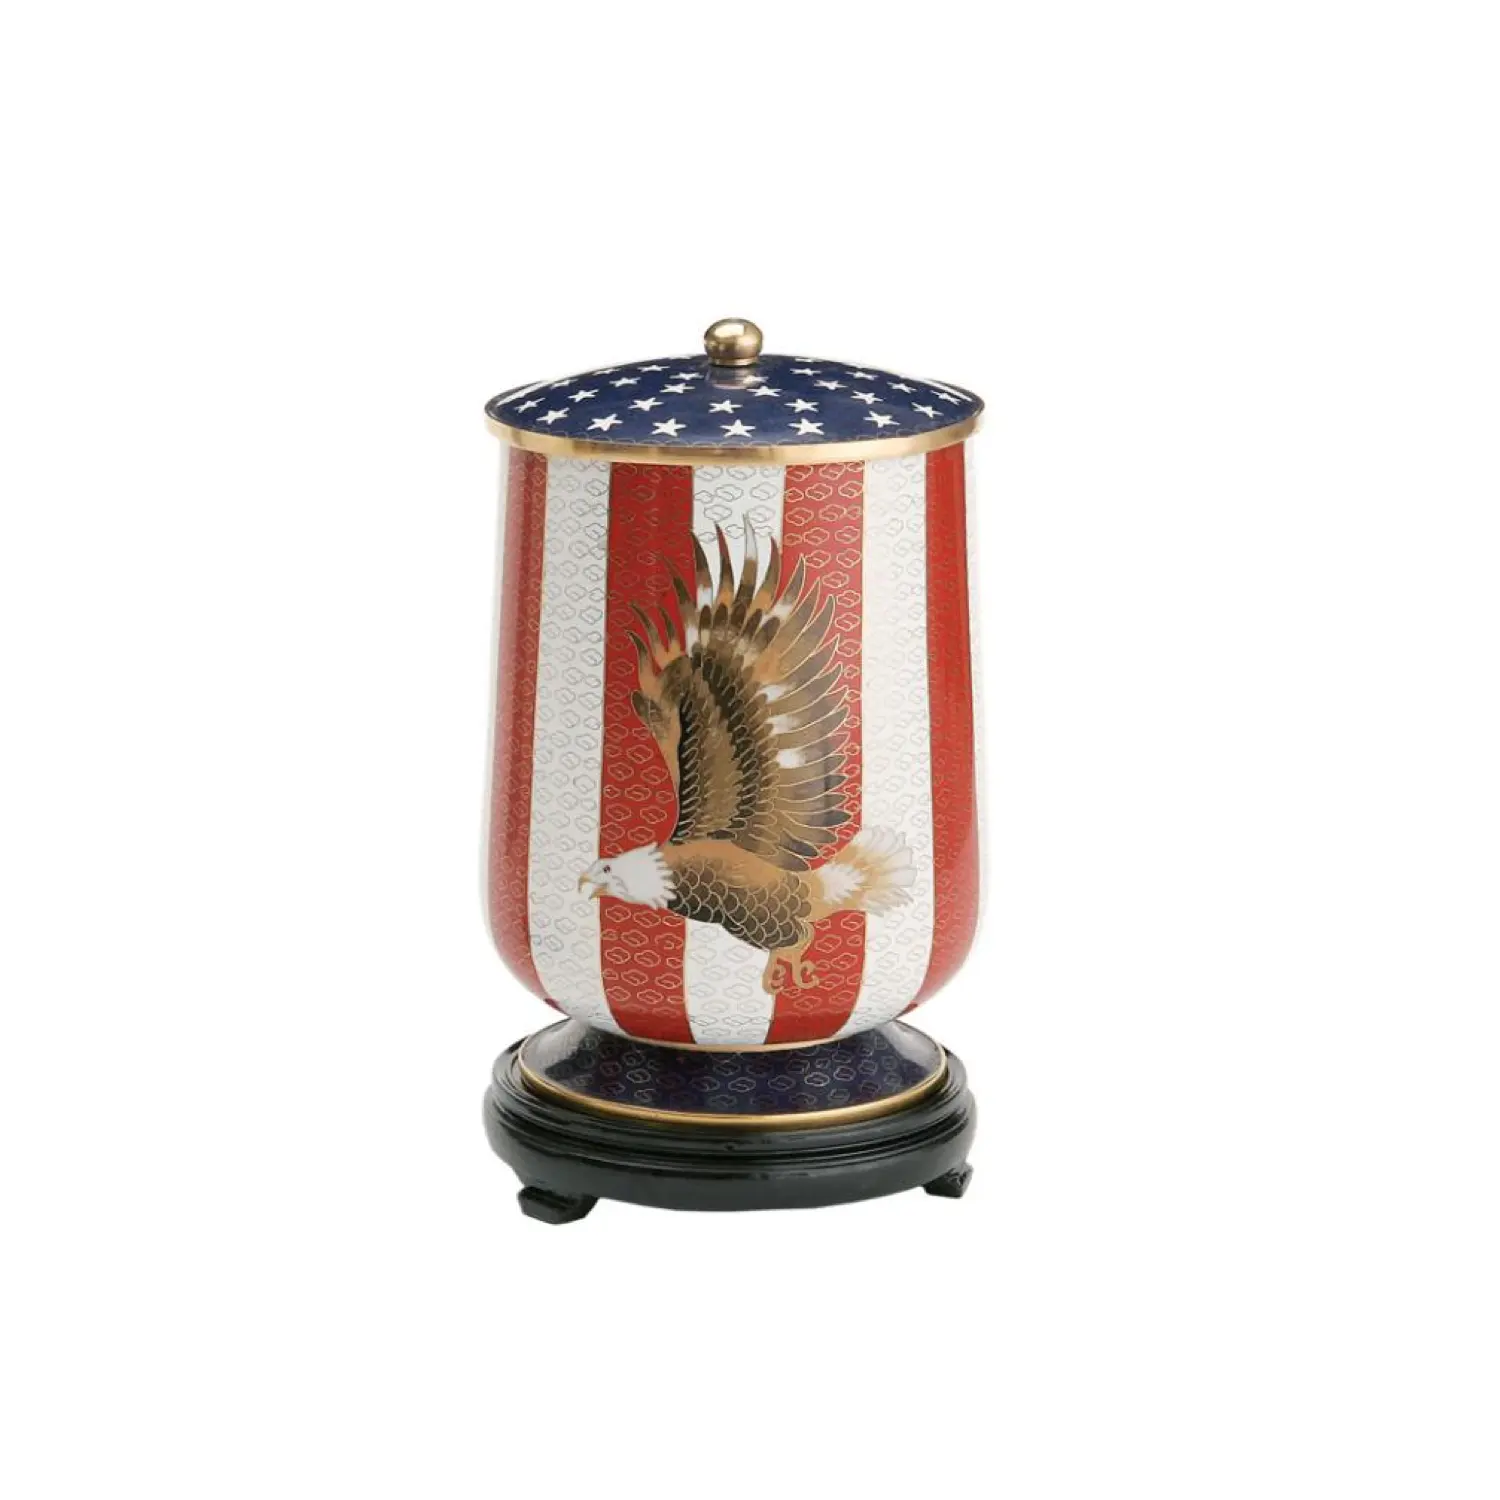 Wholesale Handmade Eagle Cremation Urns For Human Ashes With Wooden Stand Made of Pure Metal Available At Best Price